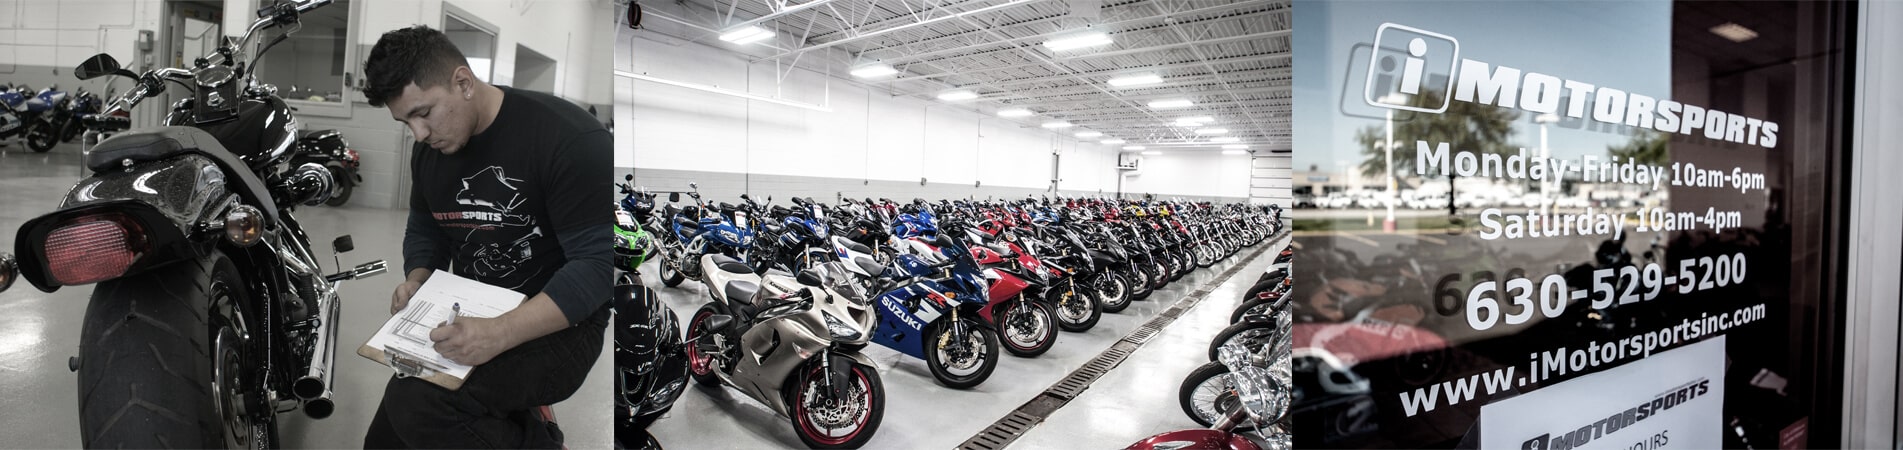 Find the Best Motorcycle for You